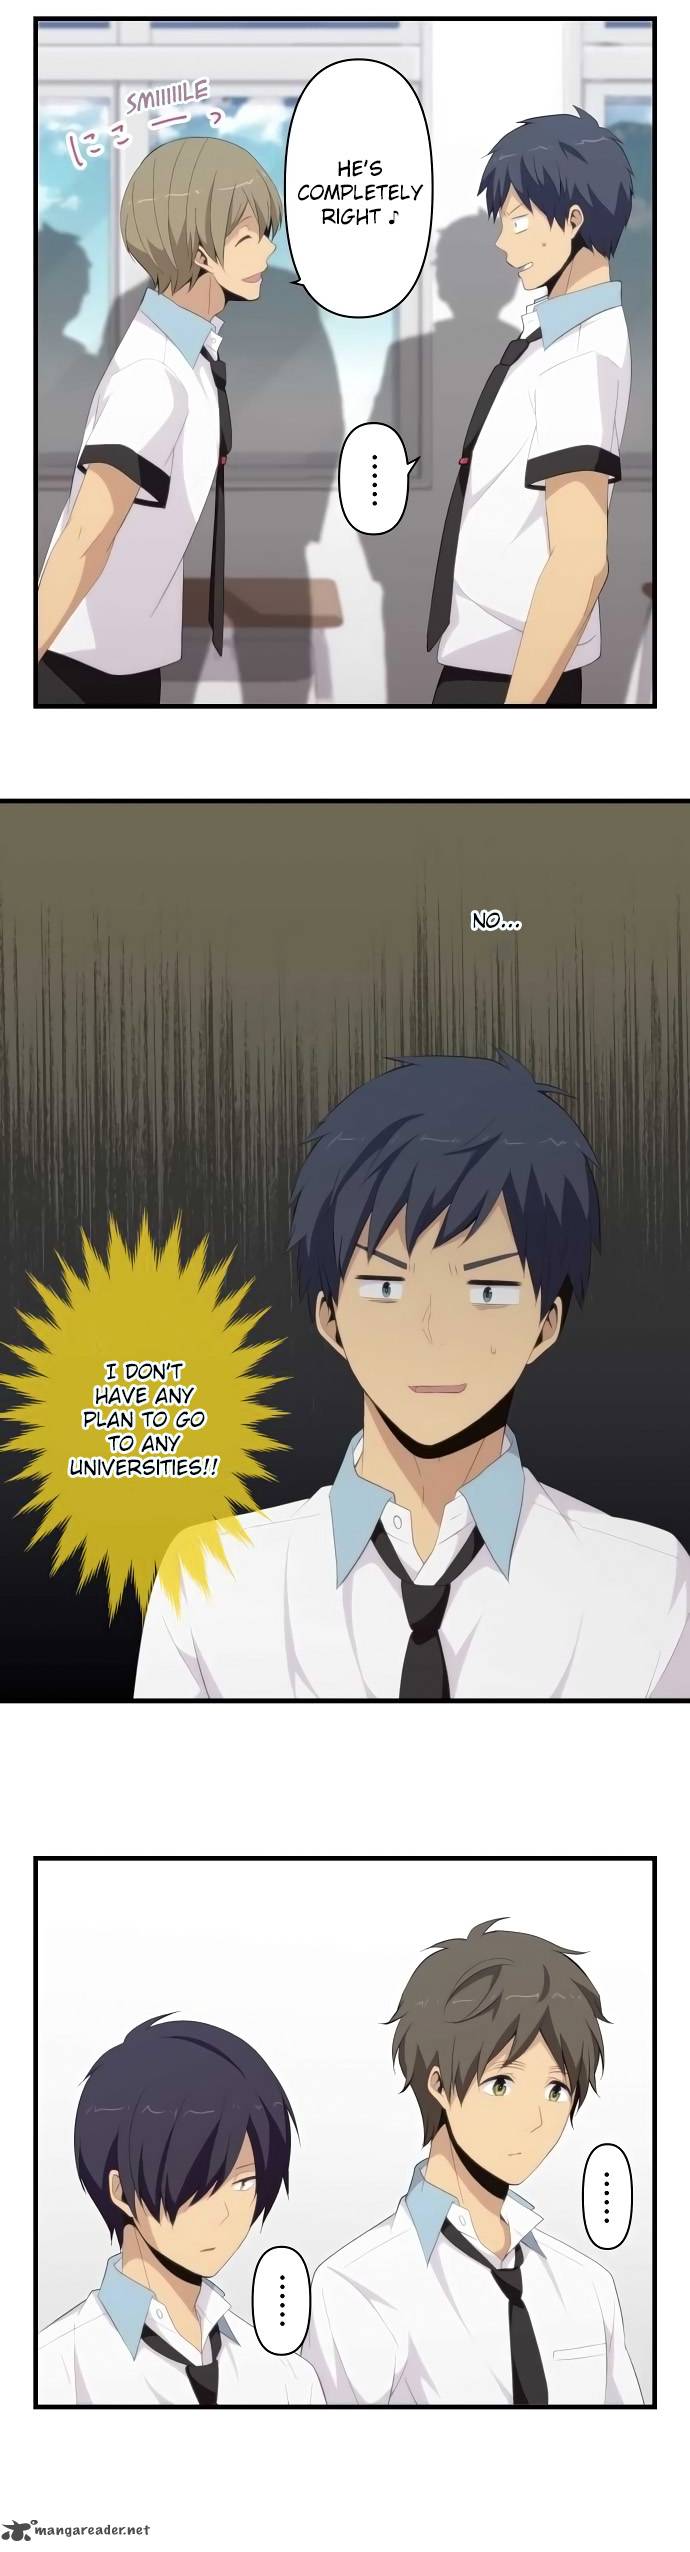 Relife 126 4